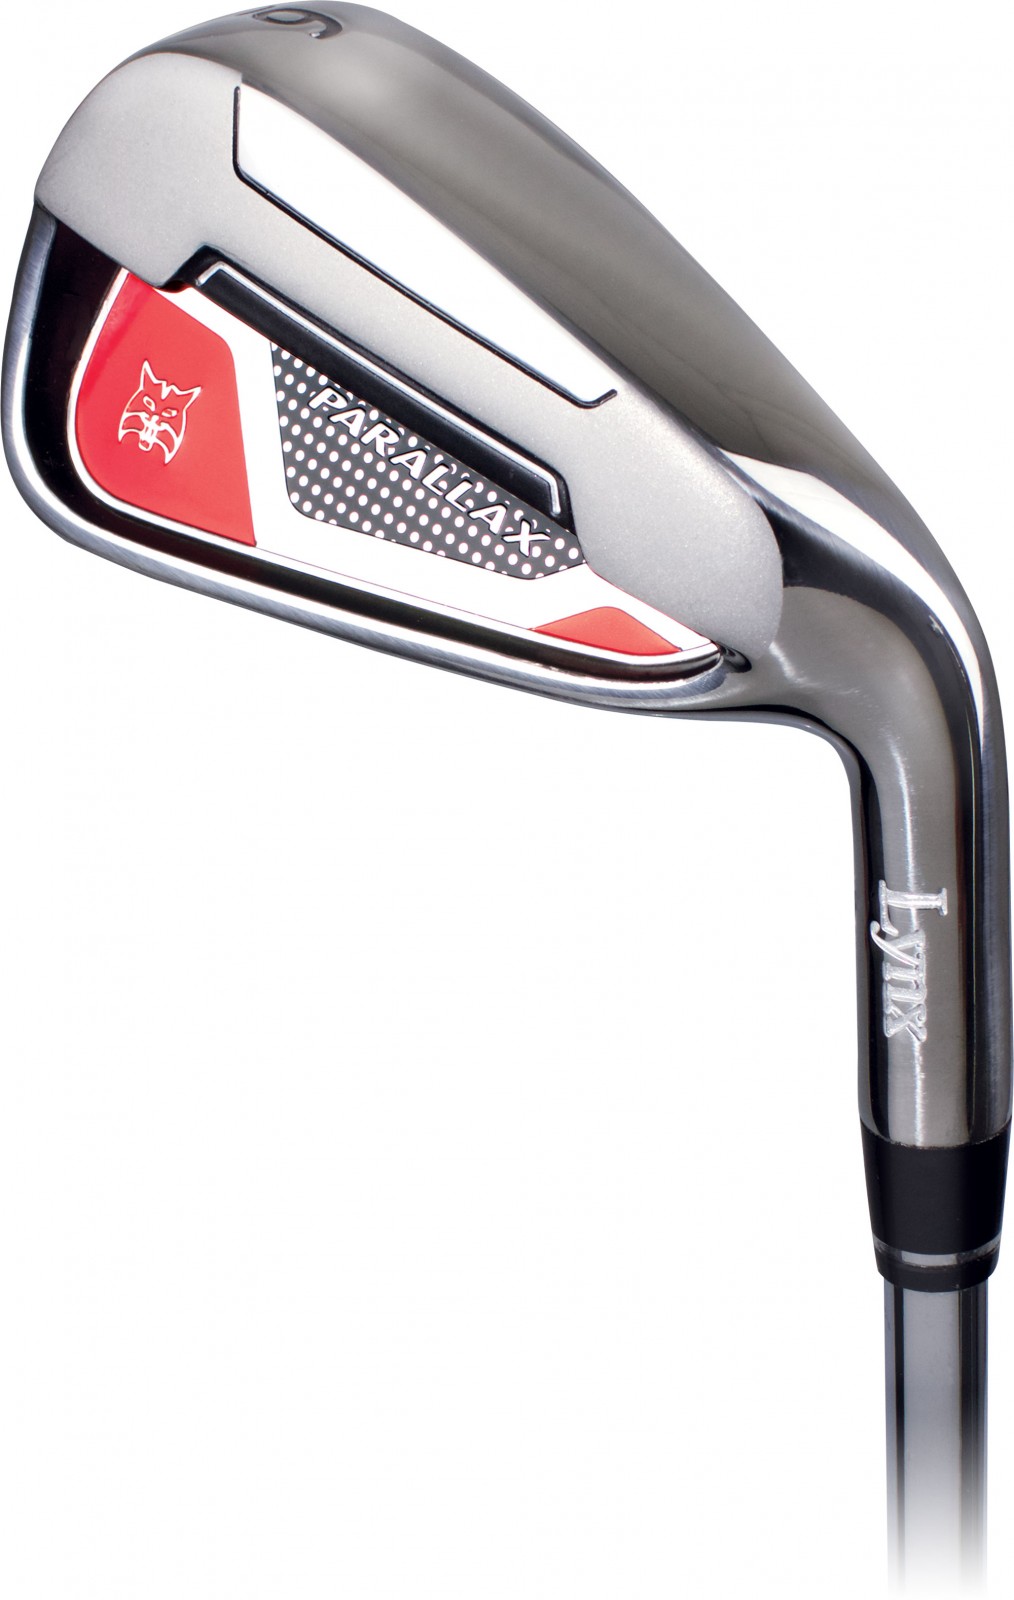 lynx parallax forged irons review